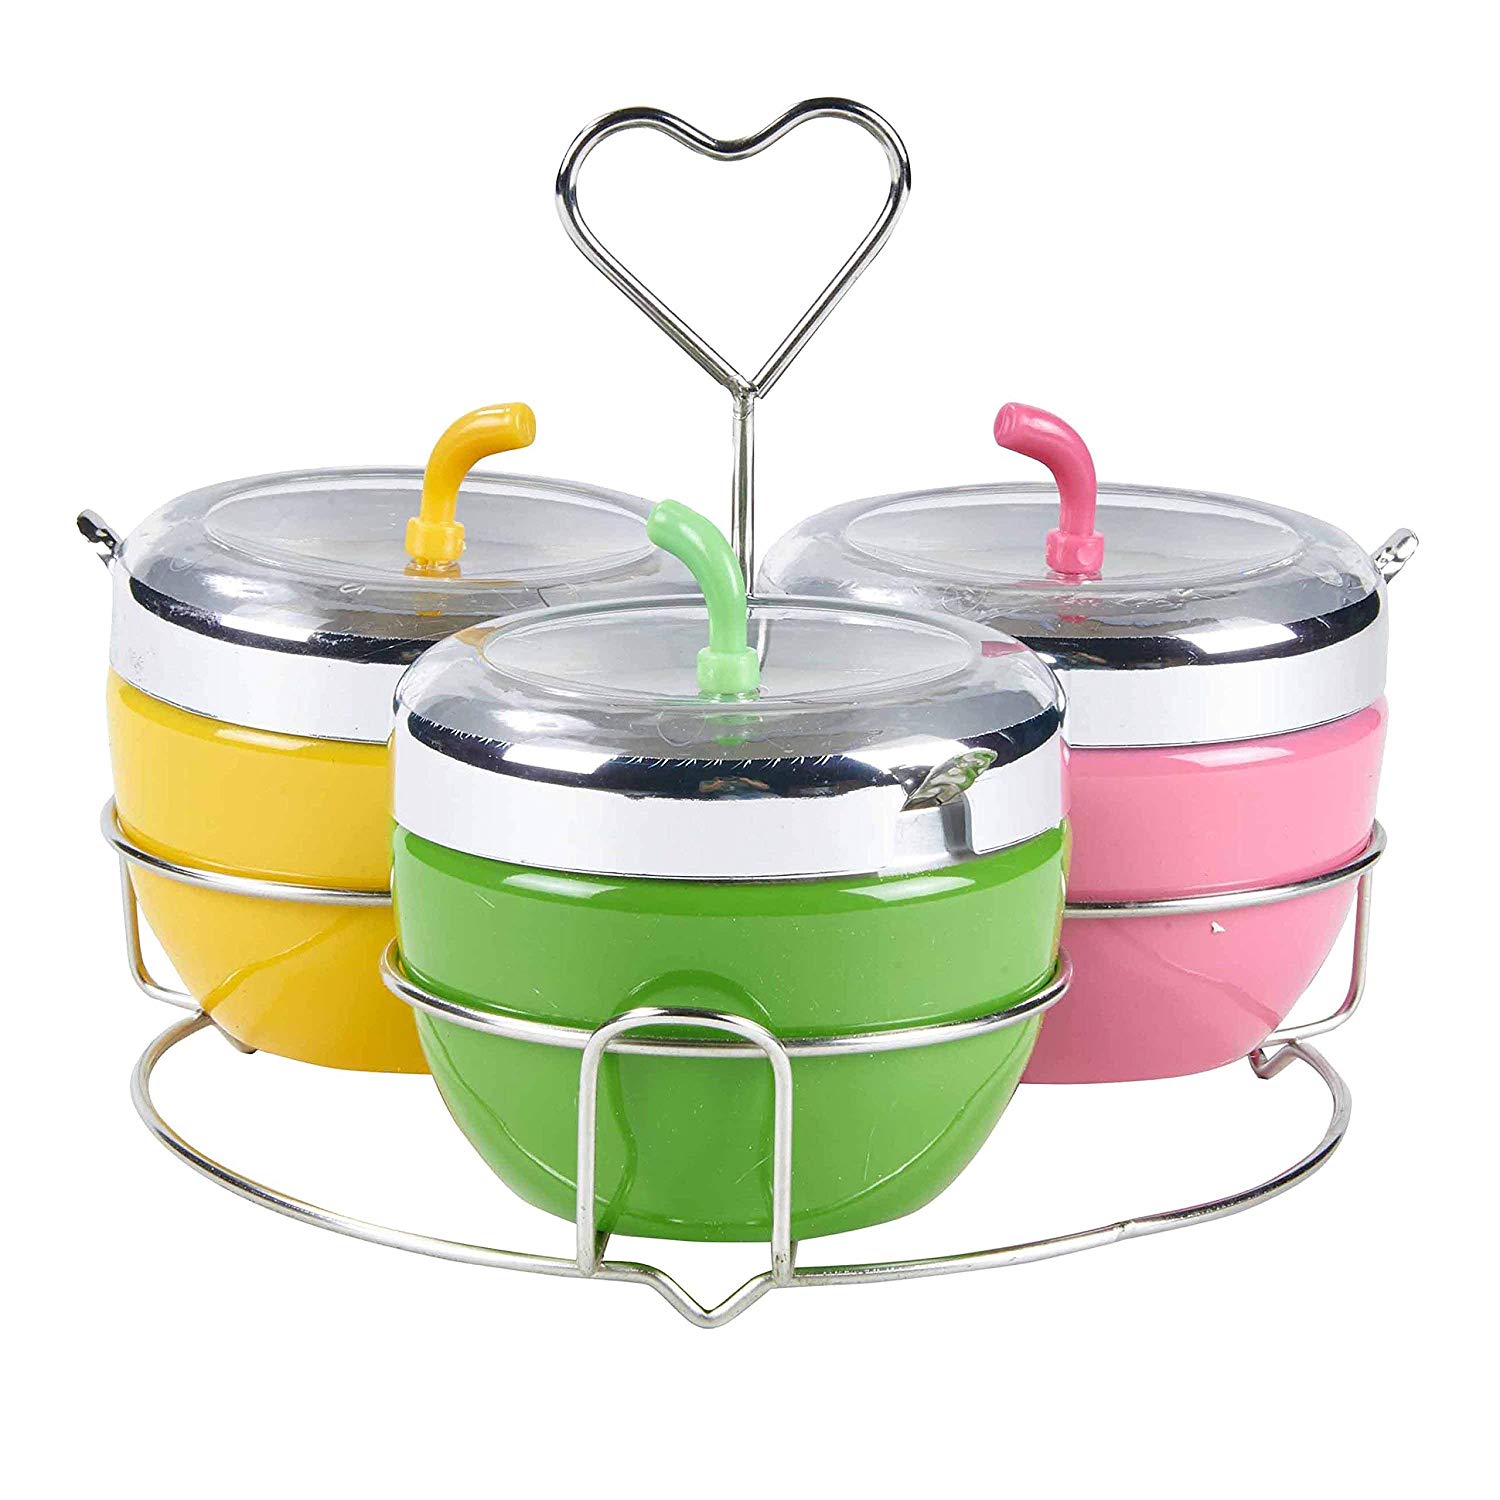 Multi-functional Colorful Stainless Steel Condiment Seasoning Containers Pots Set with Spoons and Rack/Shelf,Silver Tone(Apple Pattern Design),Green,Yellow&Pink